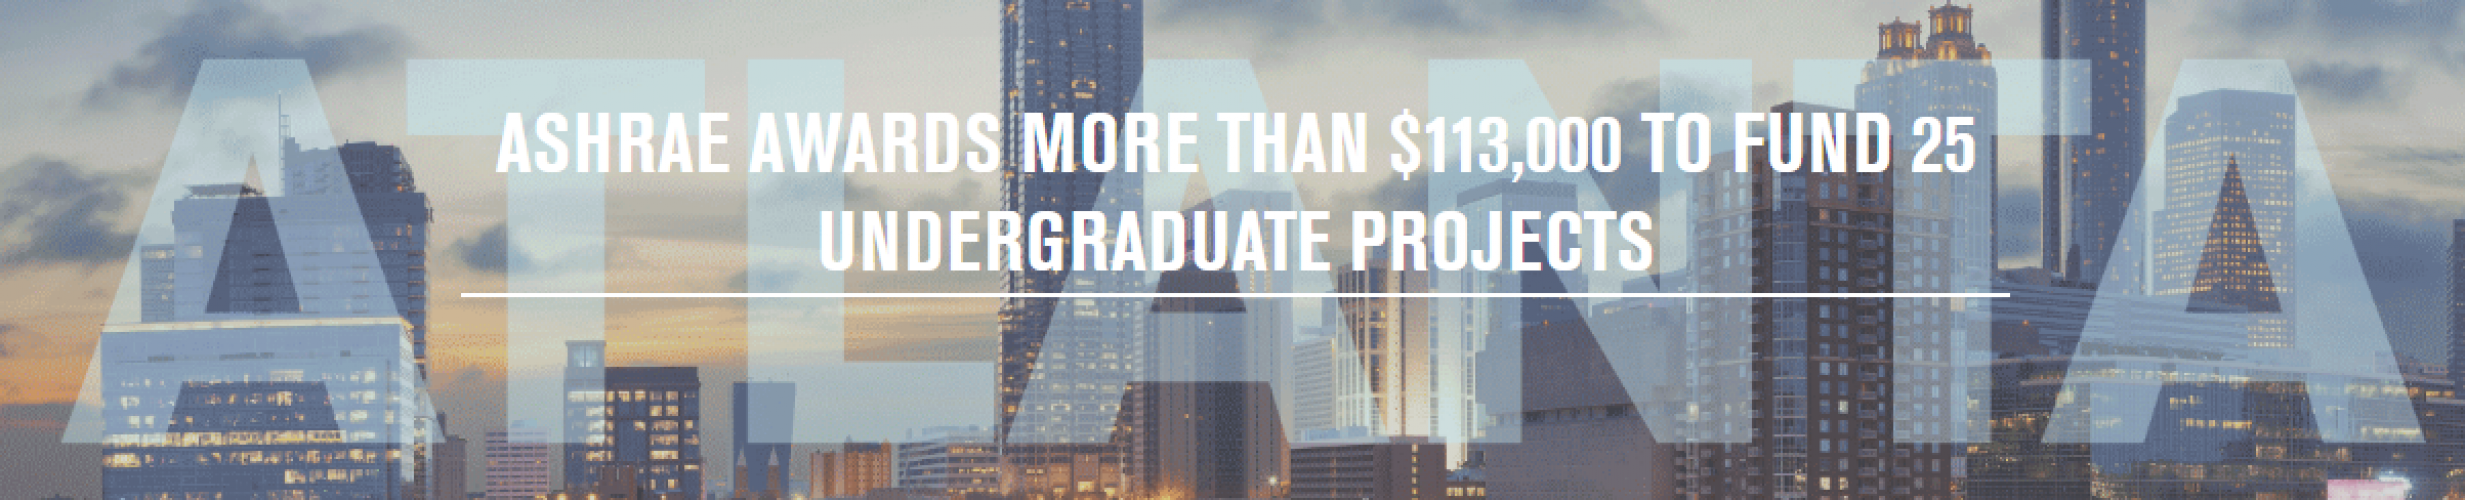 ASHRAE Awards More Than $113,000 to Fund 25 Undergraduate Projects